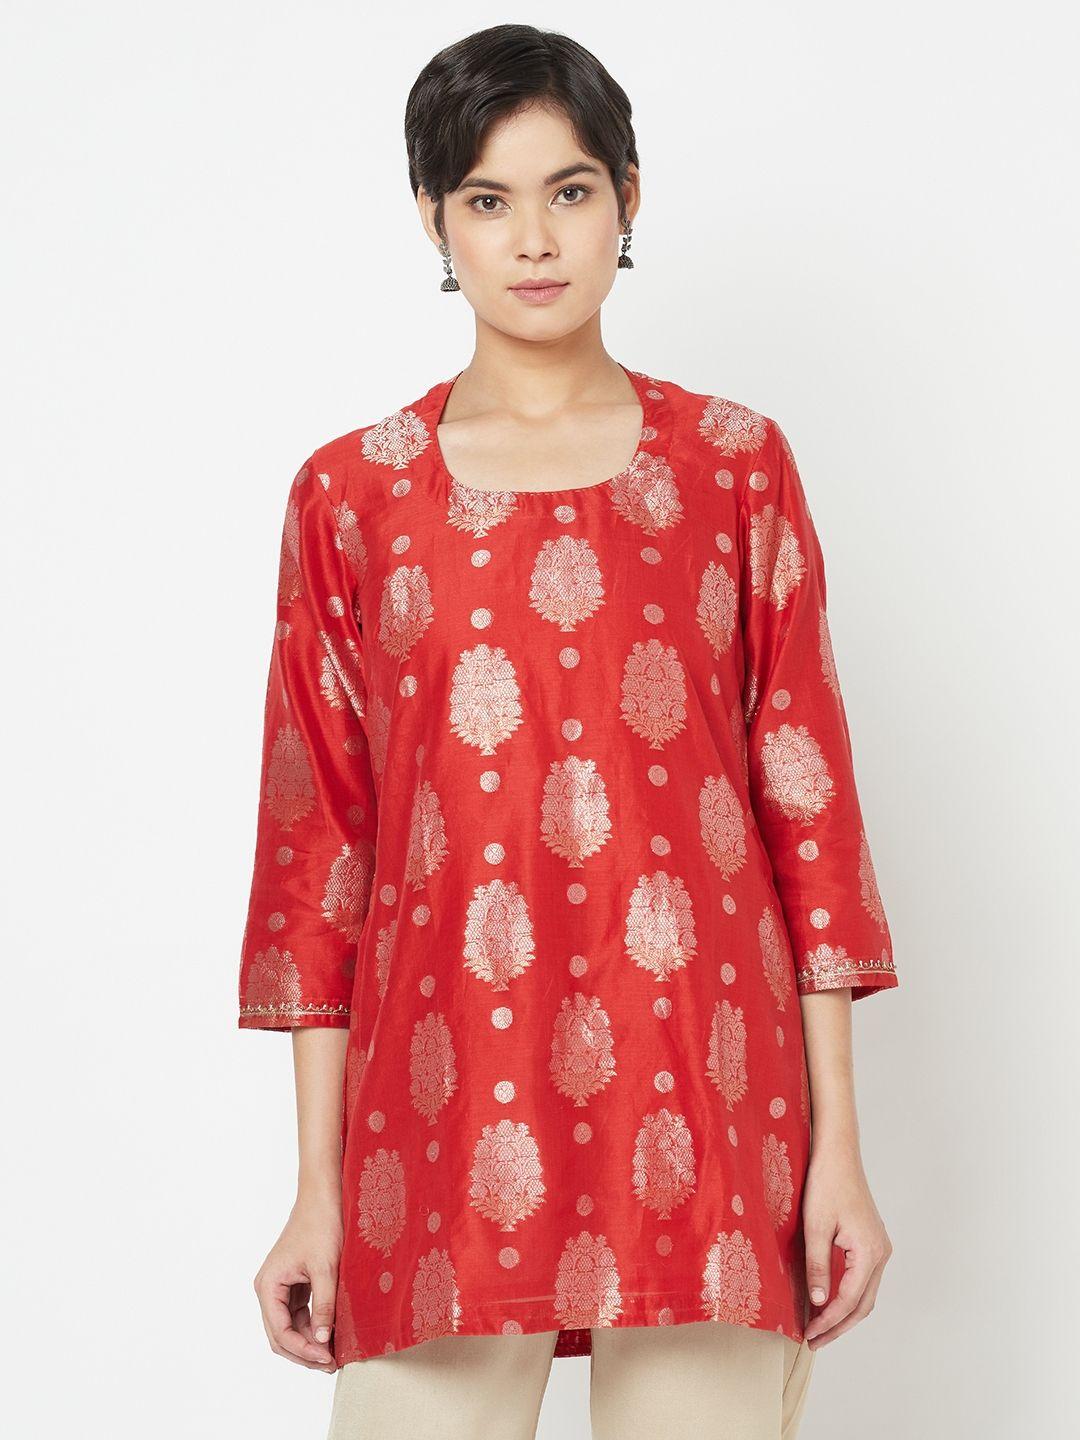 fabindia-red-&-golden-ethnic-print-hand-embroidered-tunic